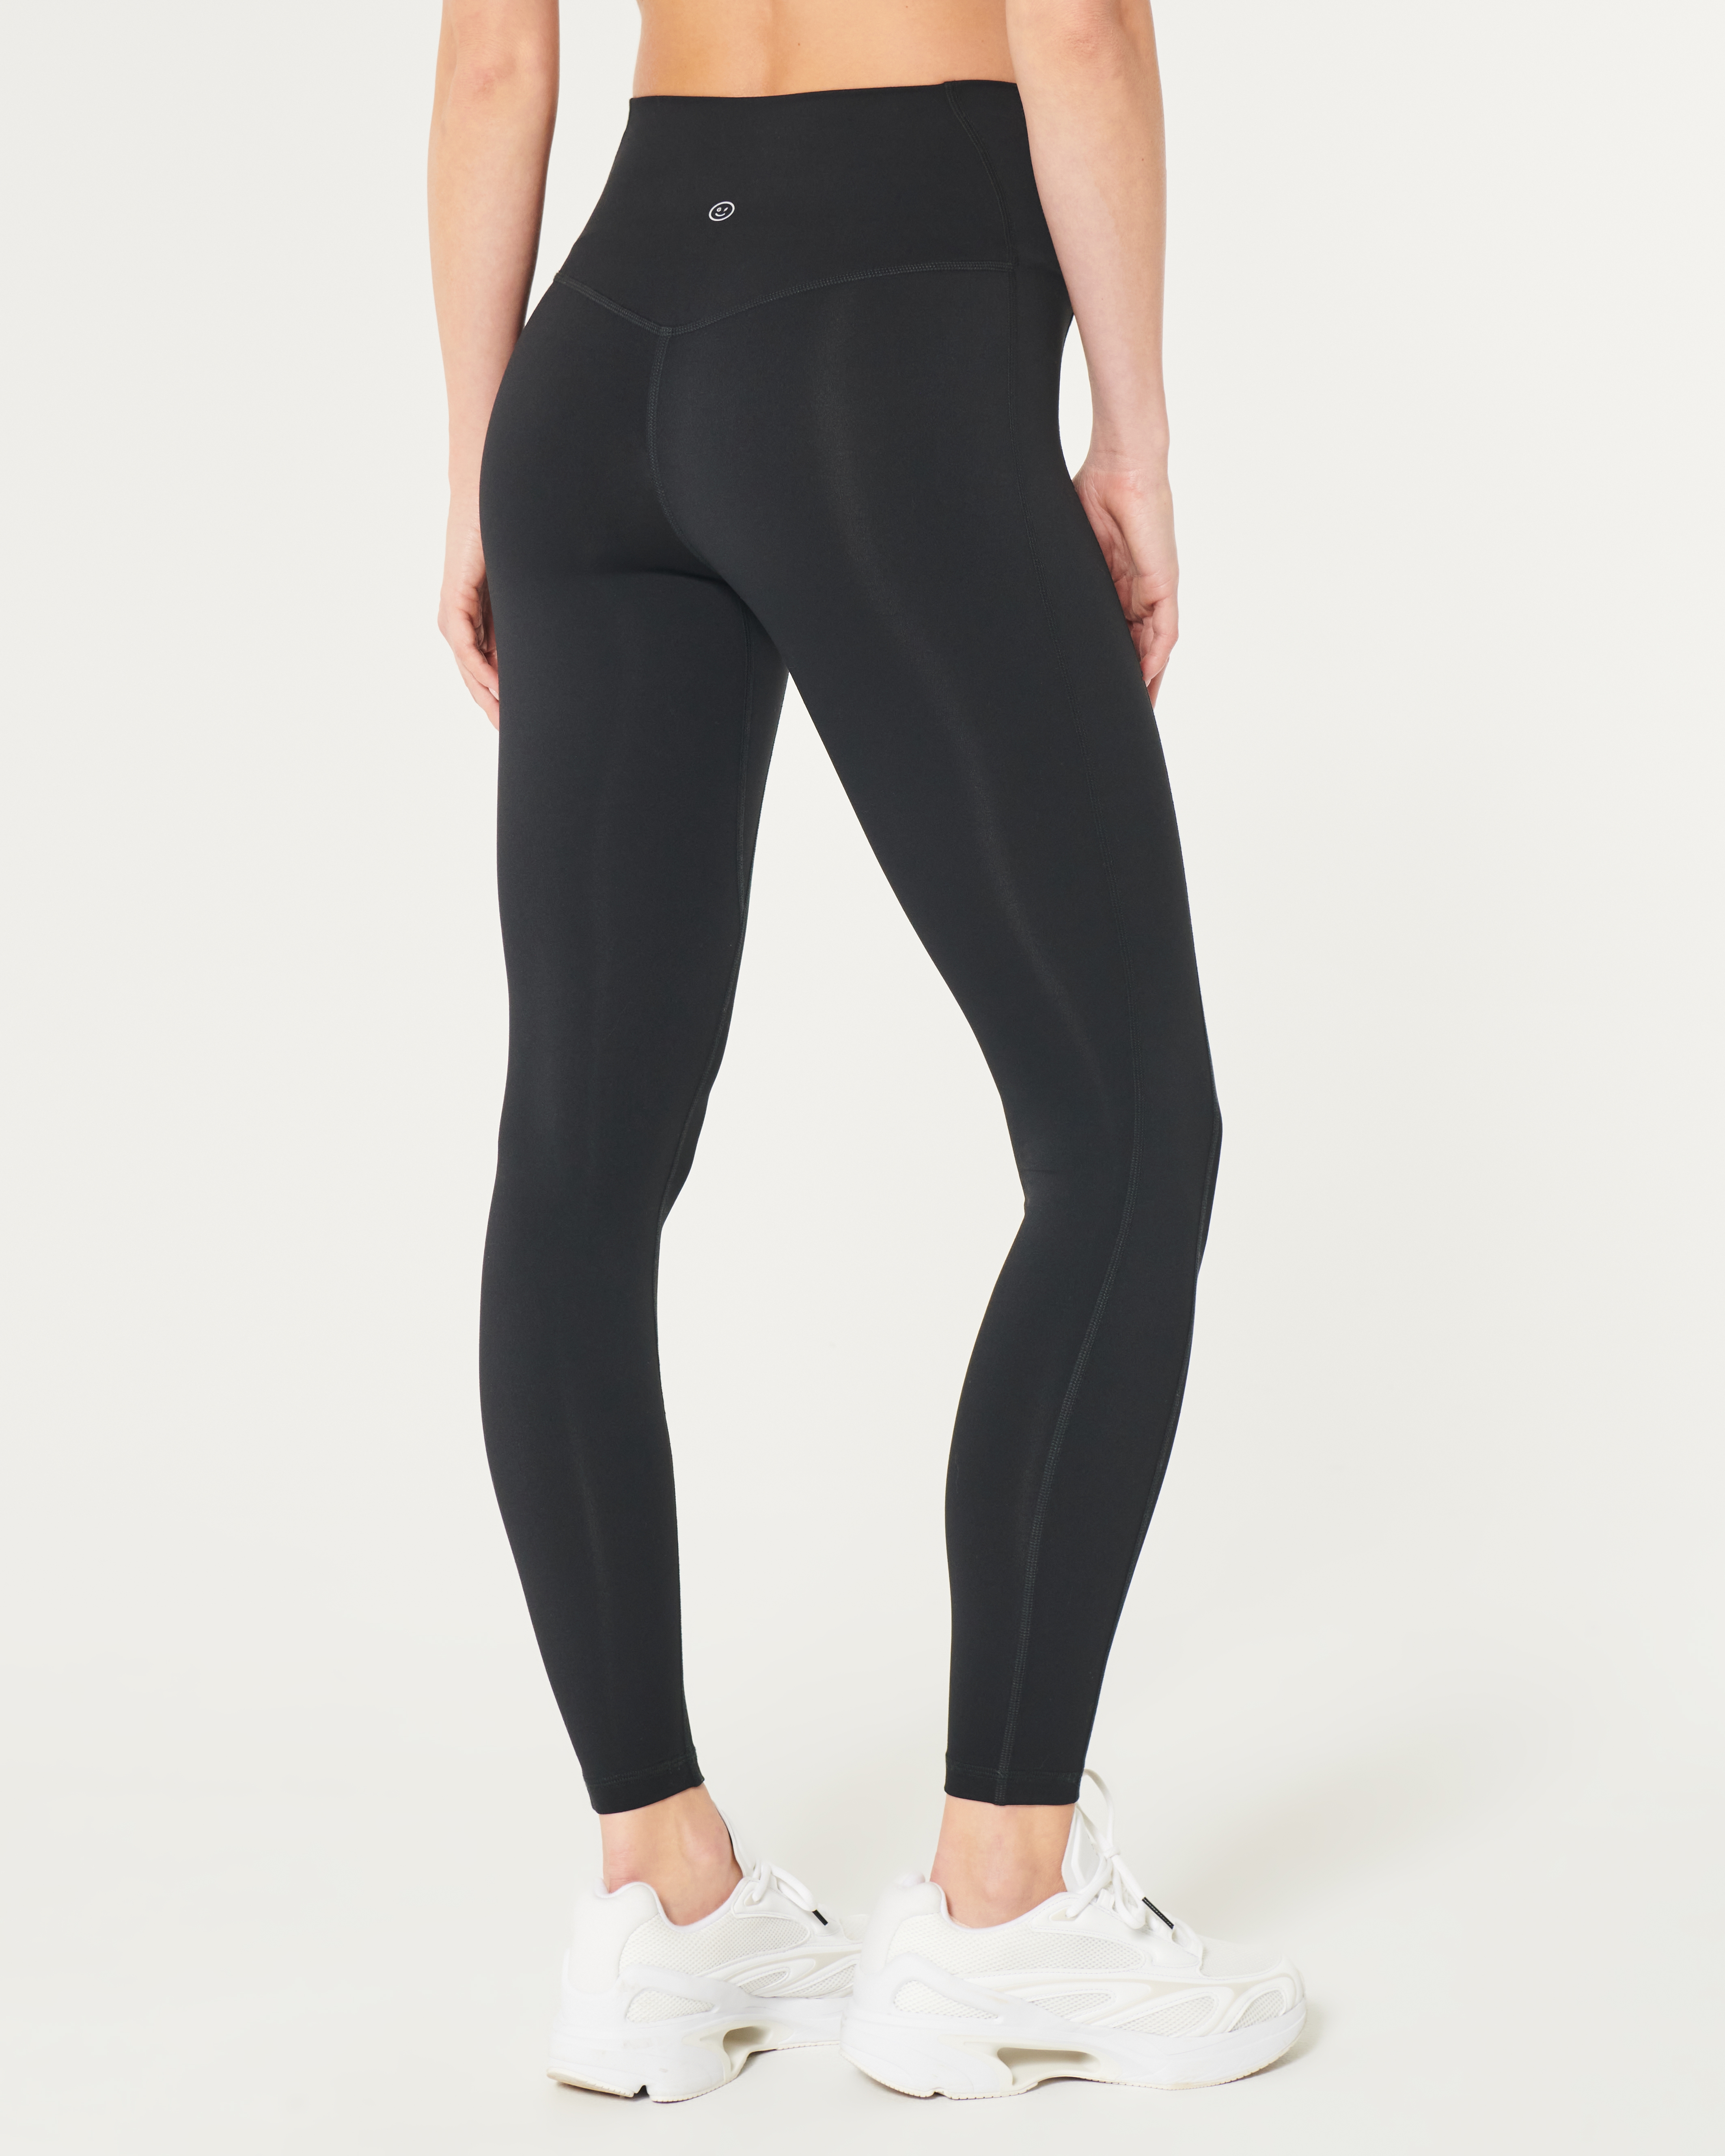 Gilly Hicks Active Boost Leggings